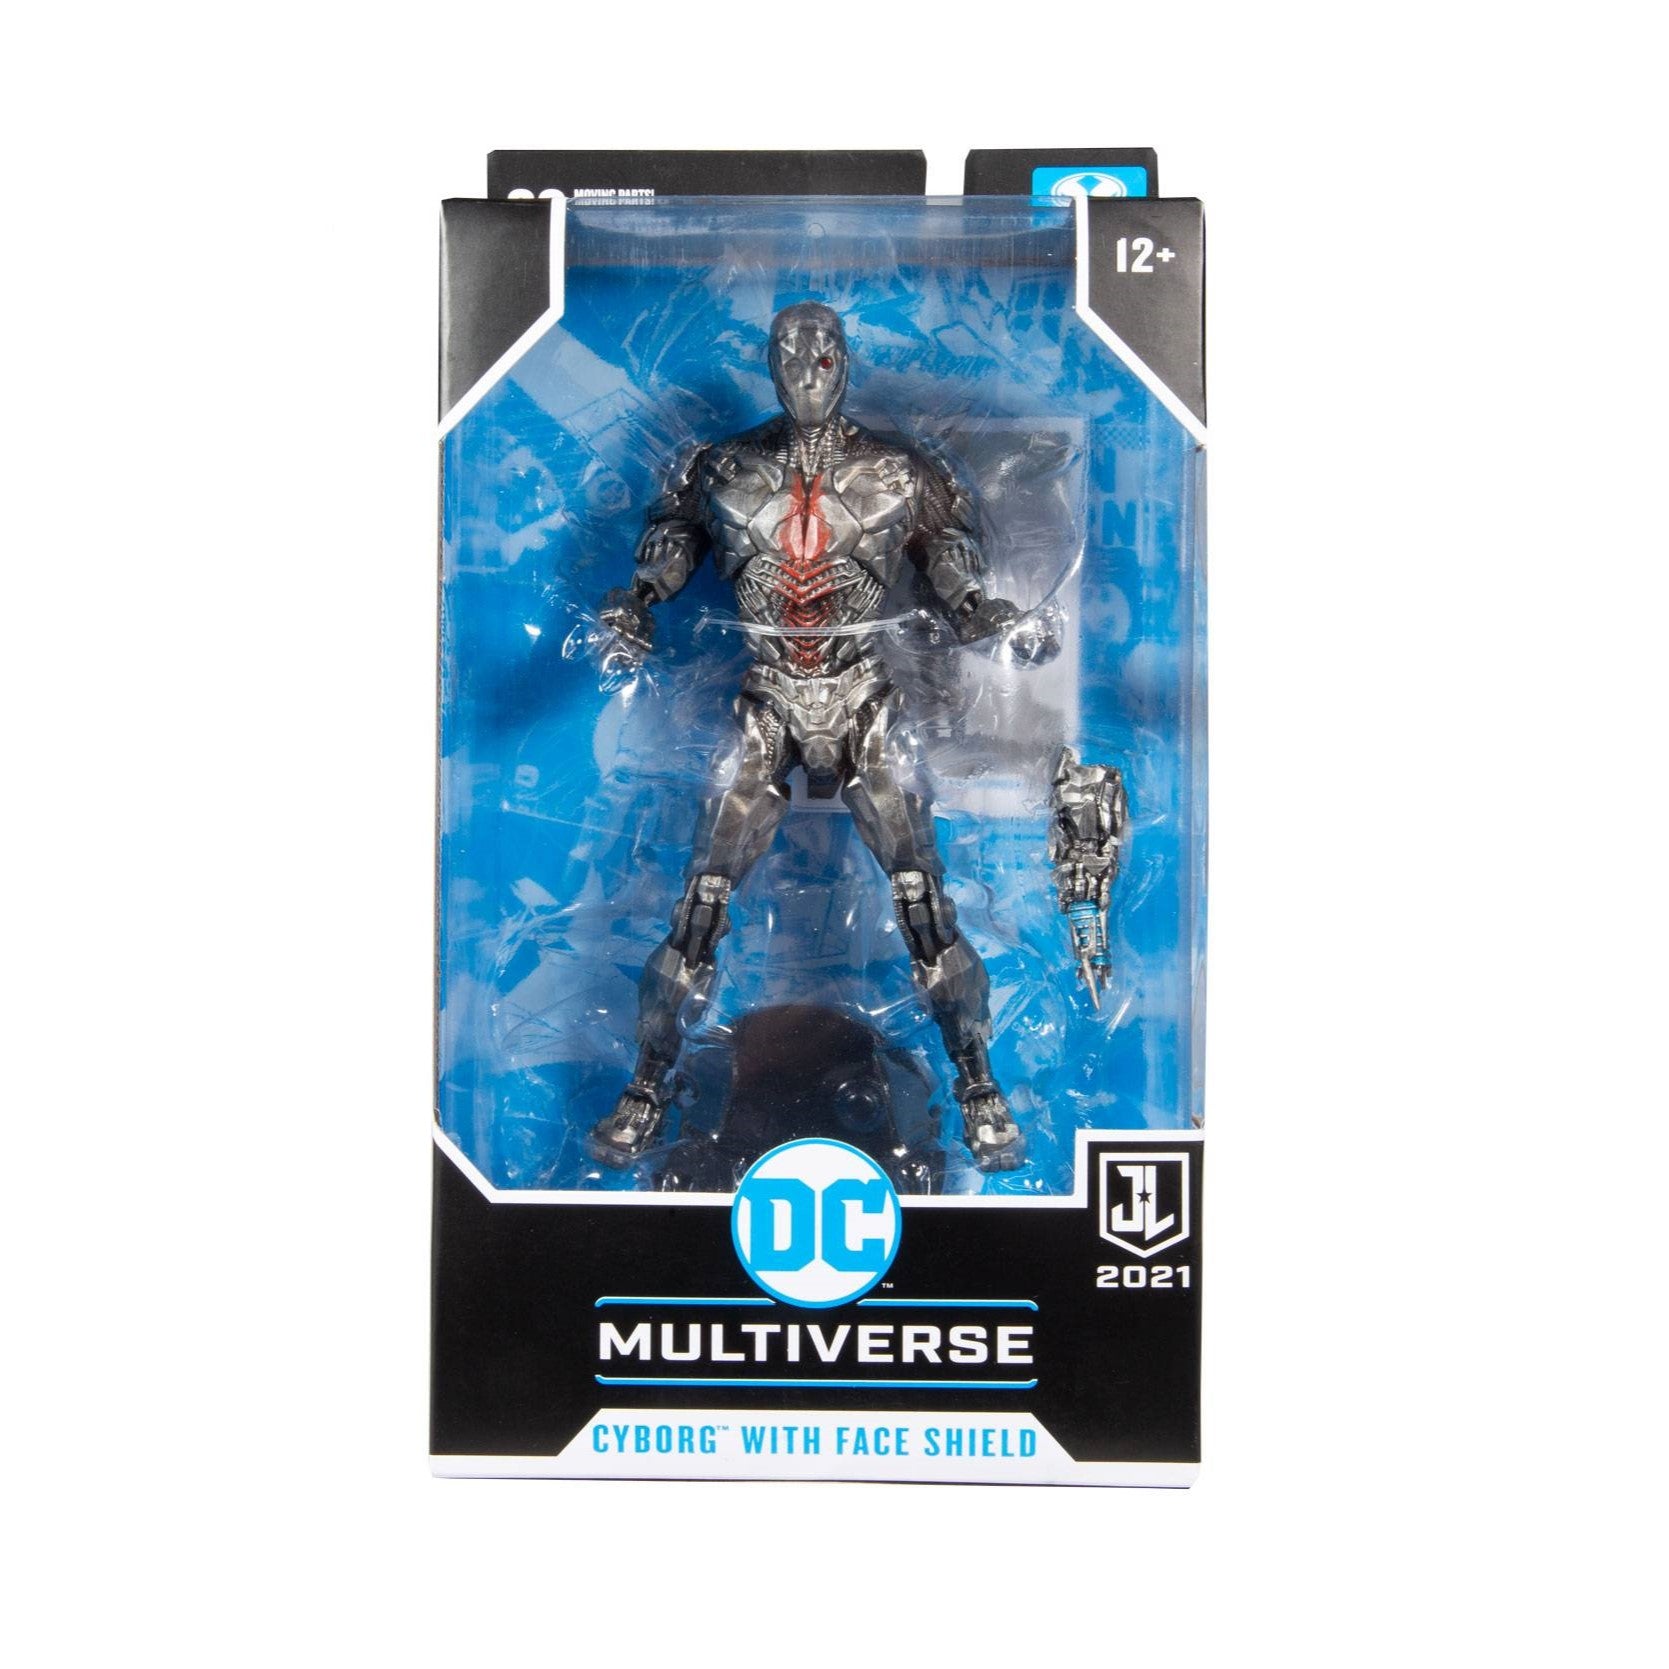 DC Multiverse Justice League Cyborg with Face Shield Helmet - McFarlane Toys-1